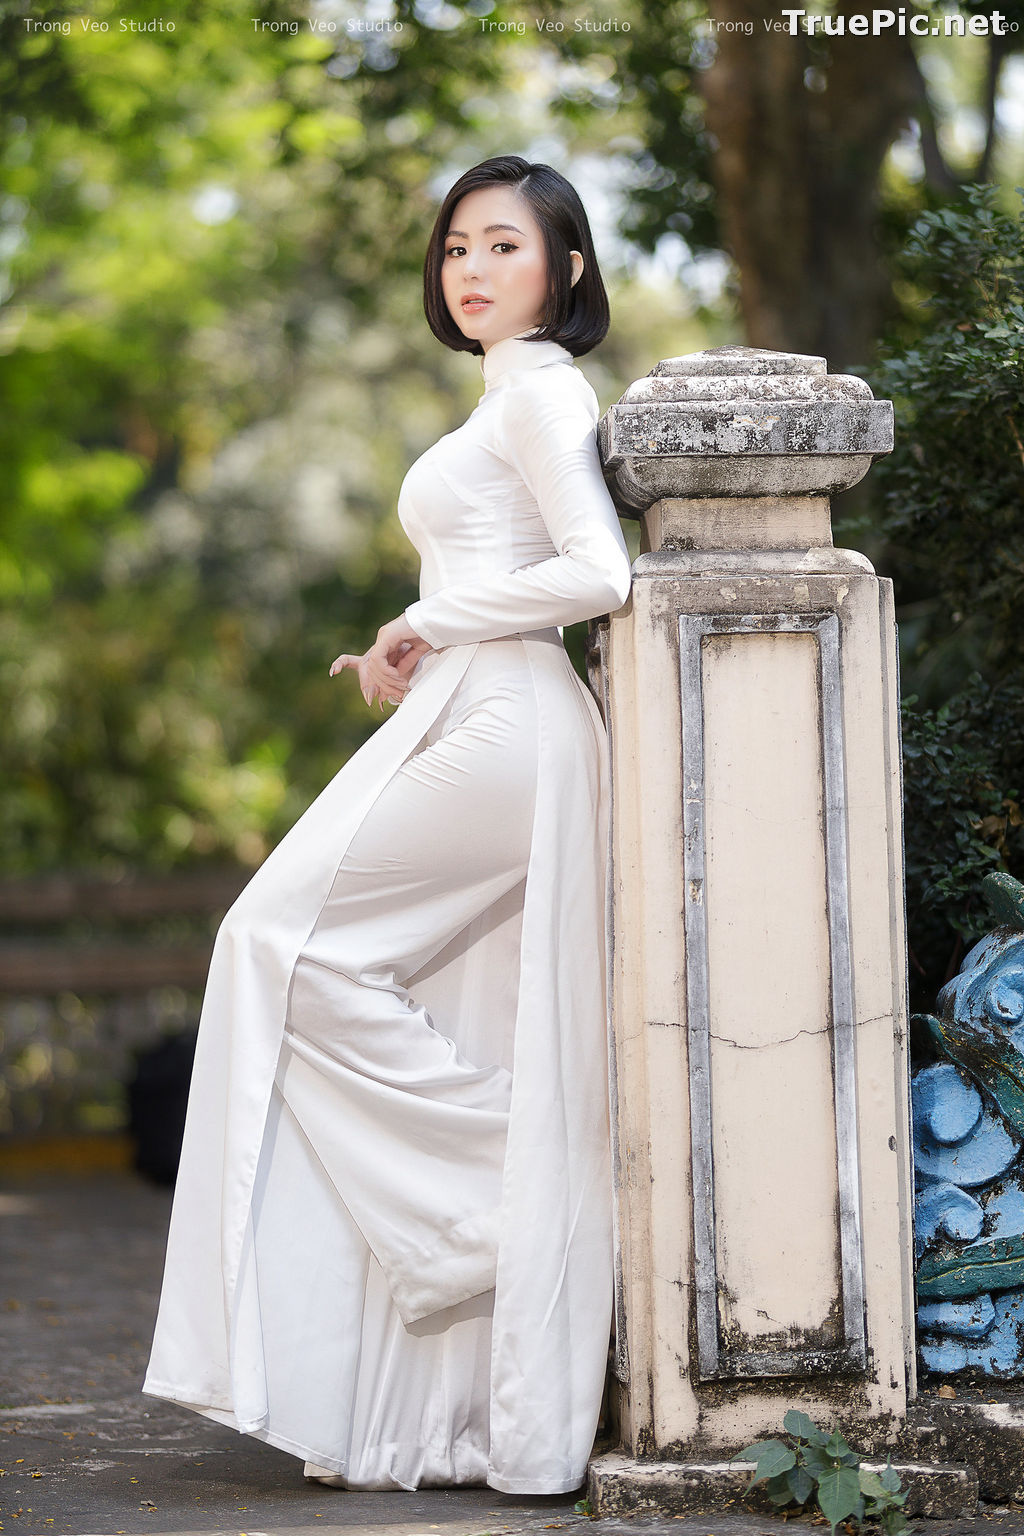 Image The Beauty of Vietnamese Girls with Traditional Dress (Ao Dai) #2 - TruePic.net - Picture-81